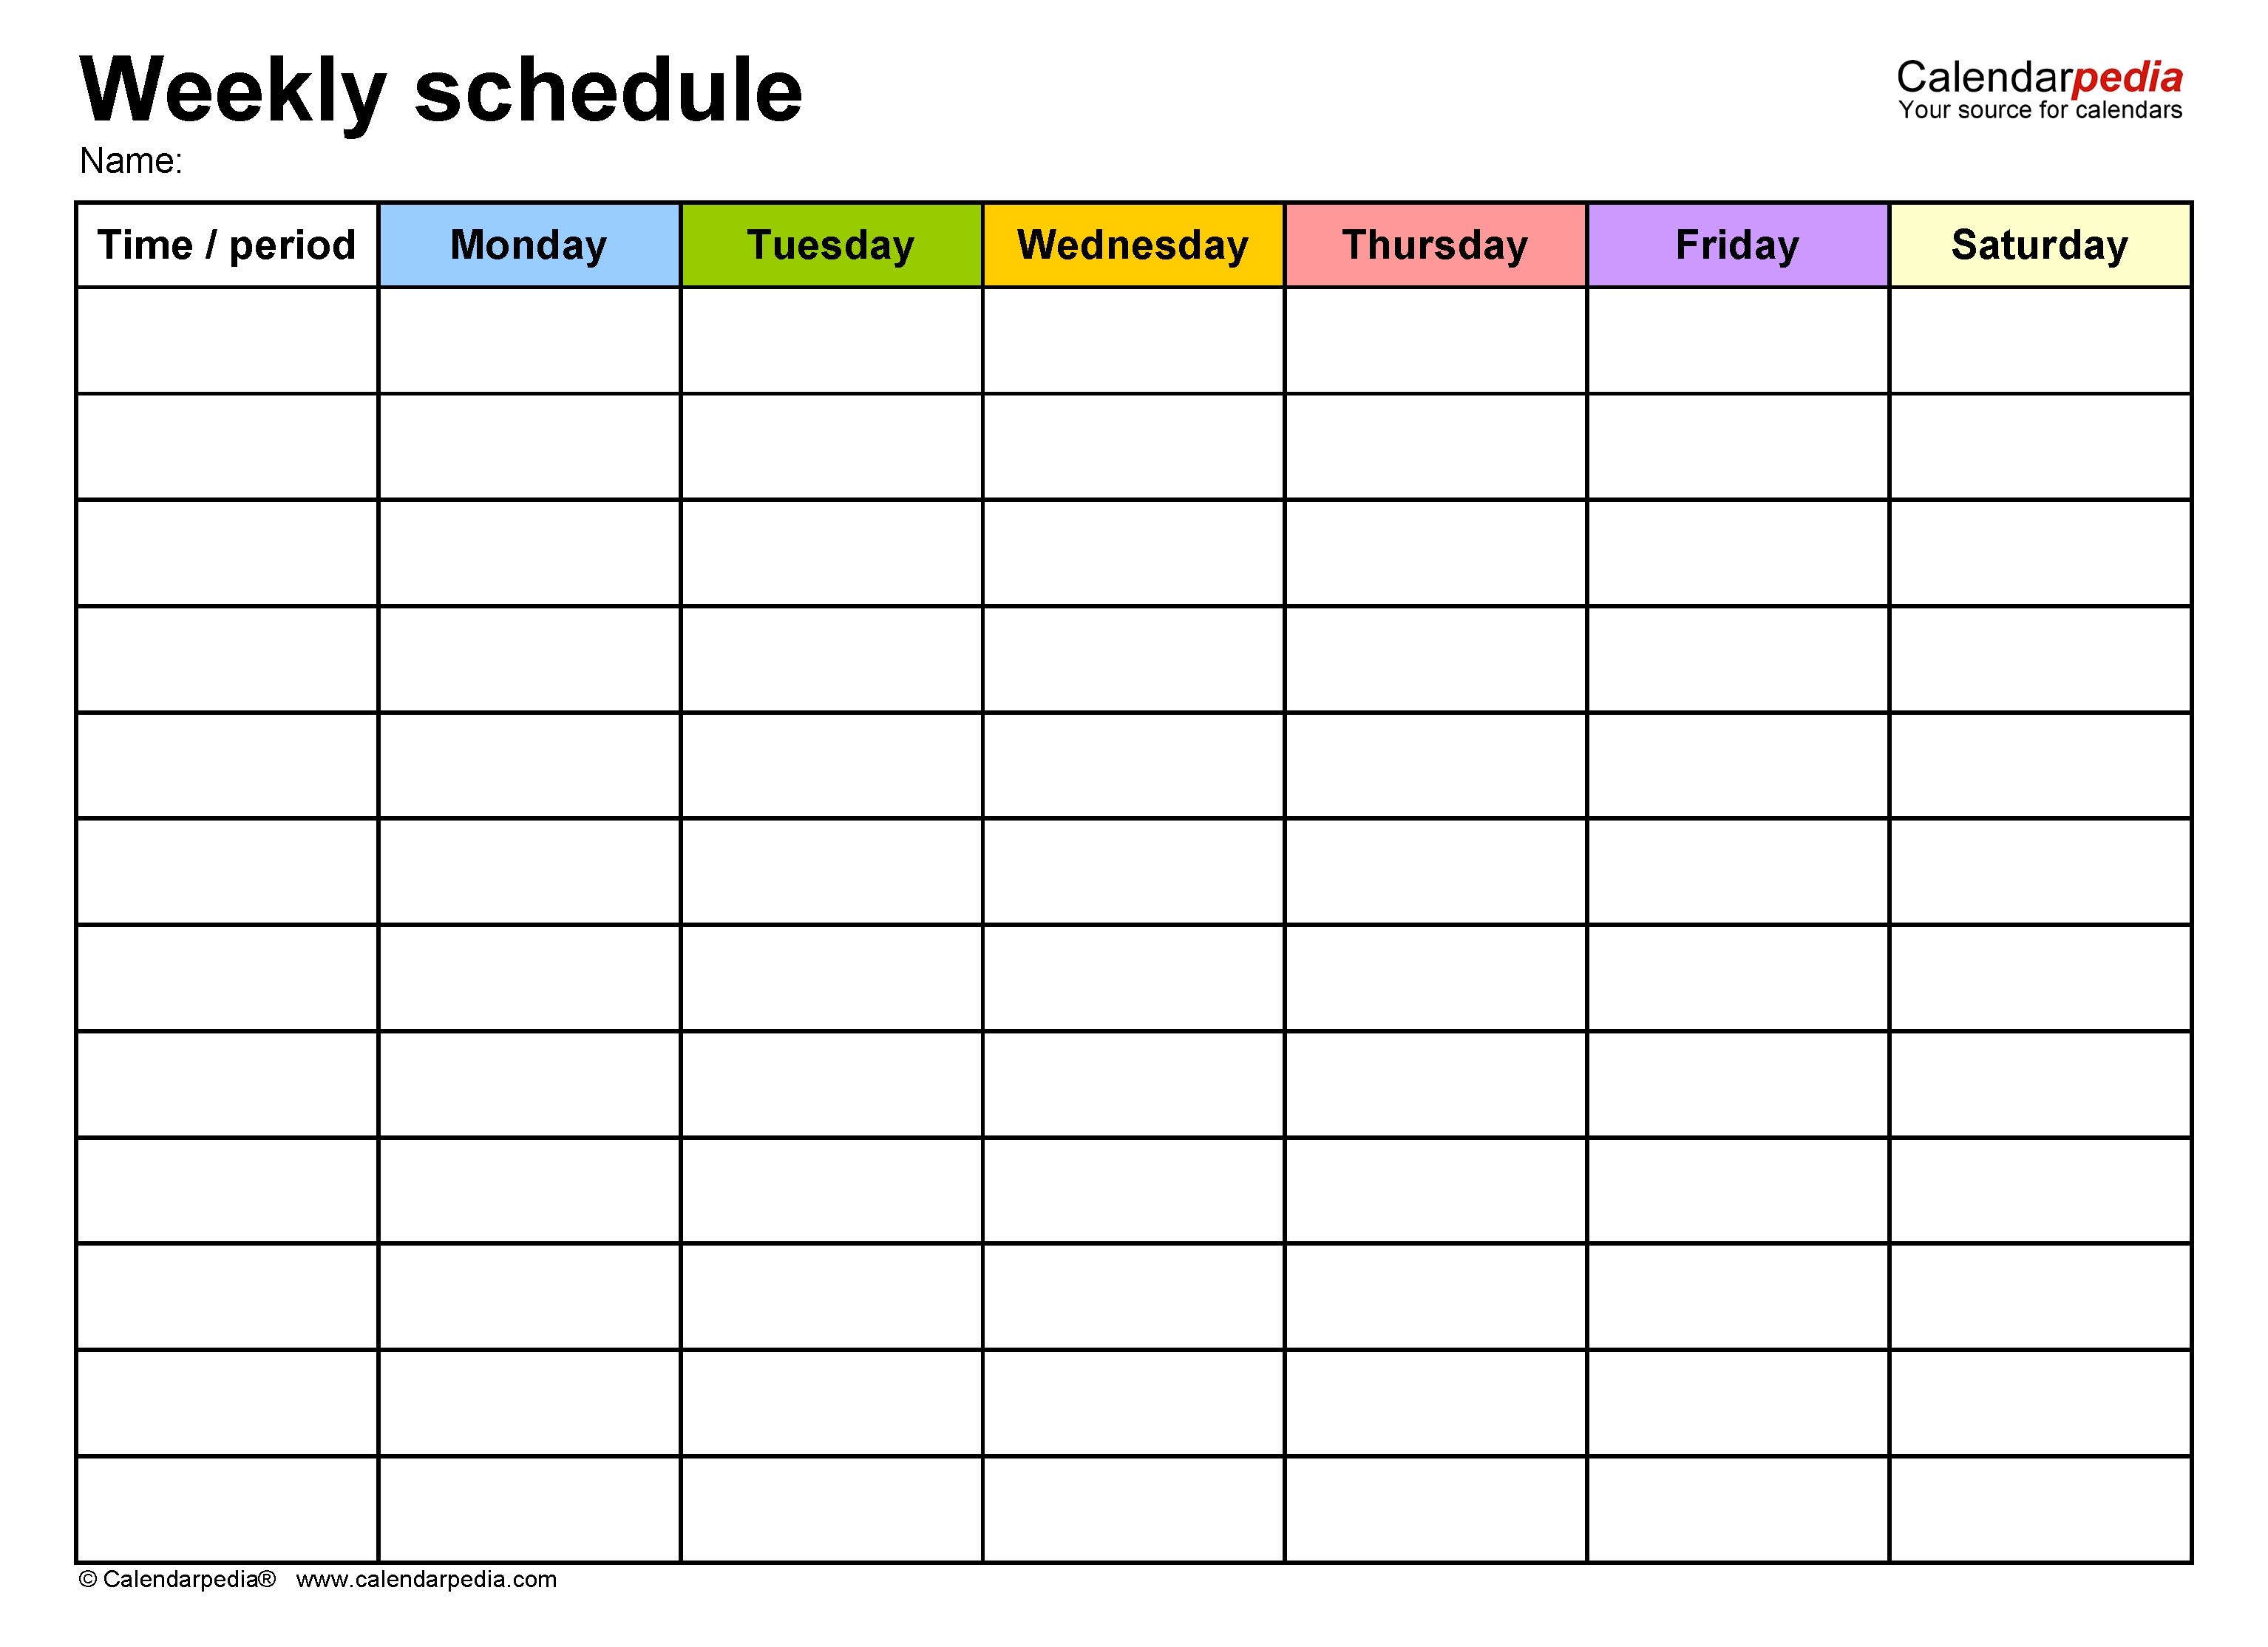 Free Weekly Schedule Templates For Word - 18 Templates  7 Day Weekly Chart Printable